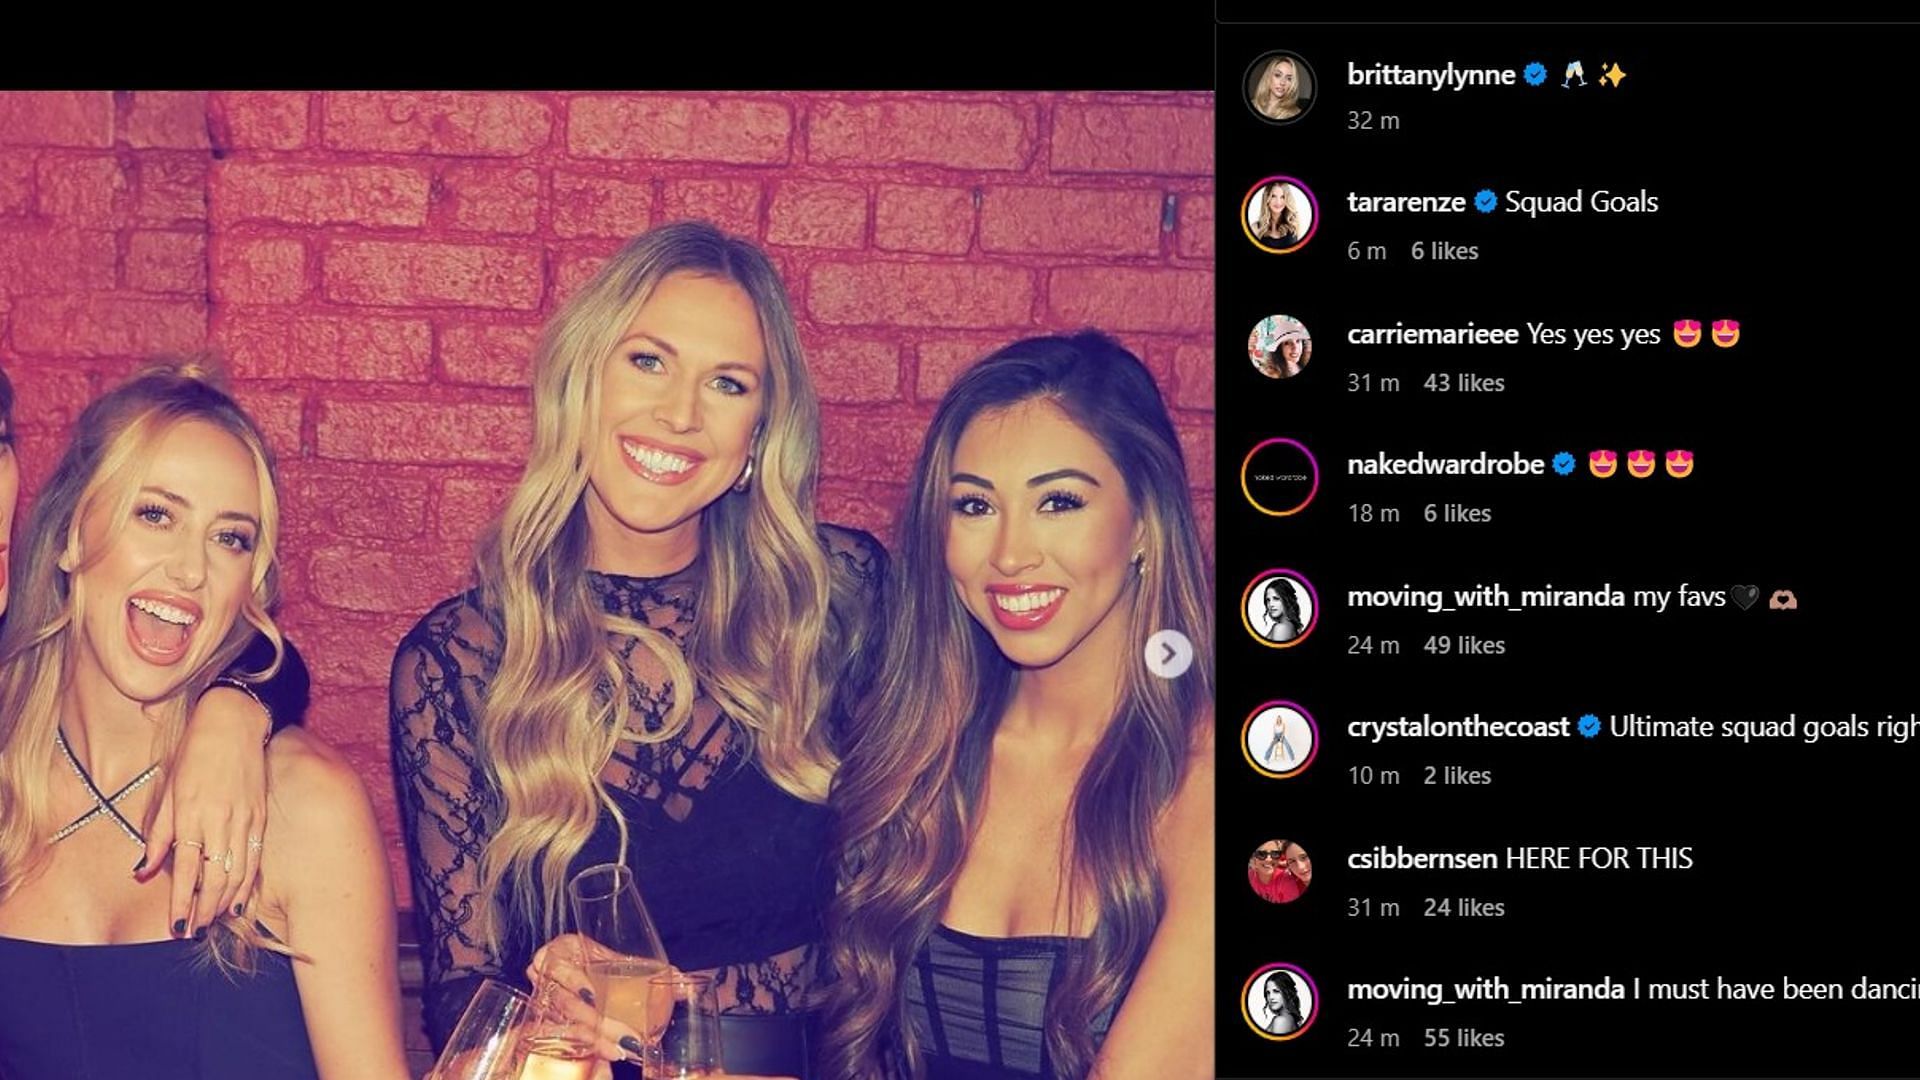 Brittany and her friends on a night out.